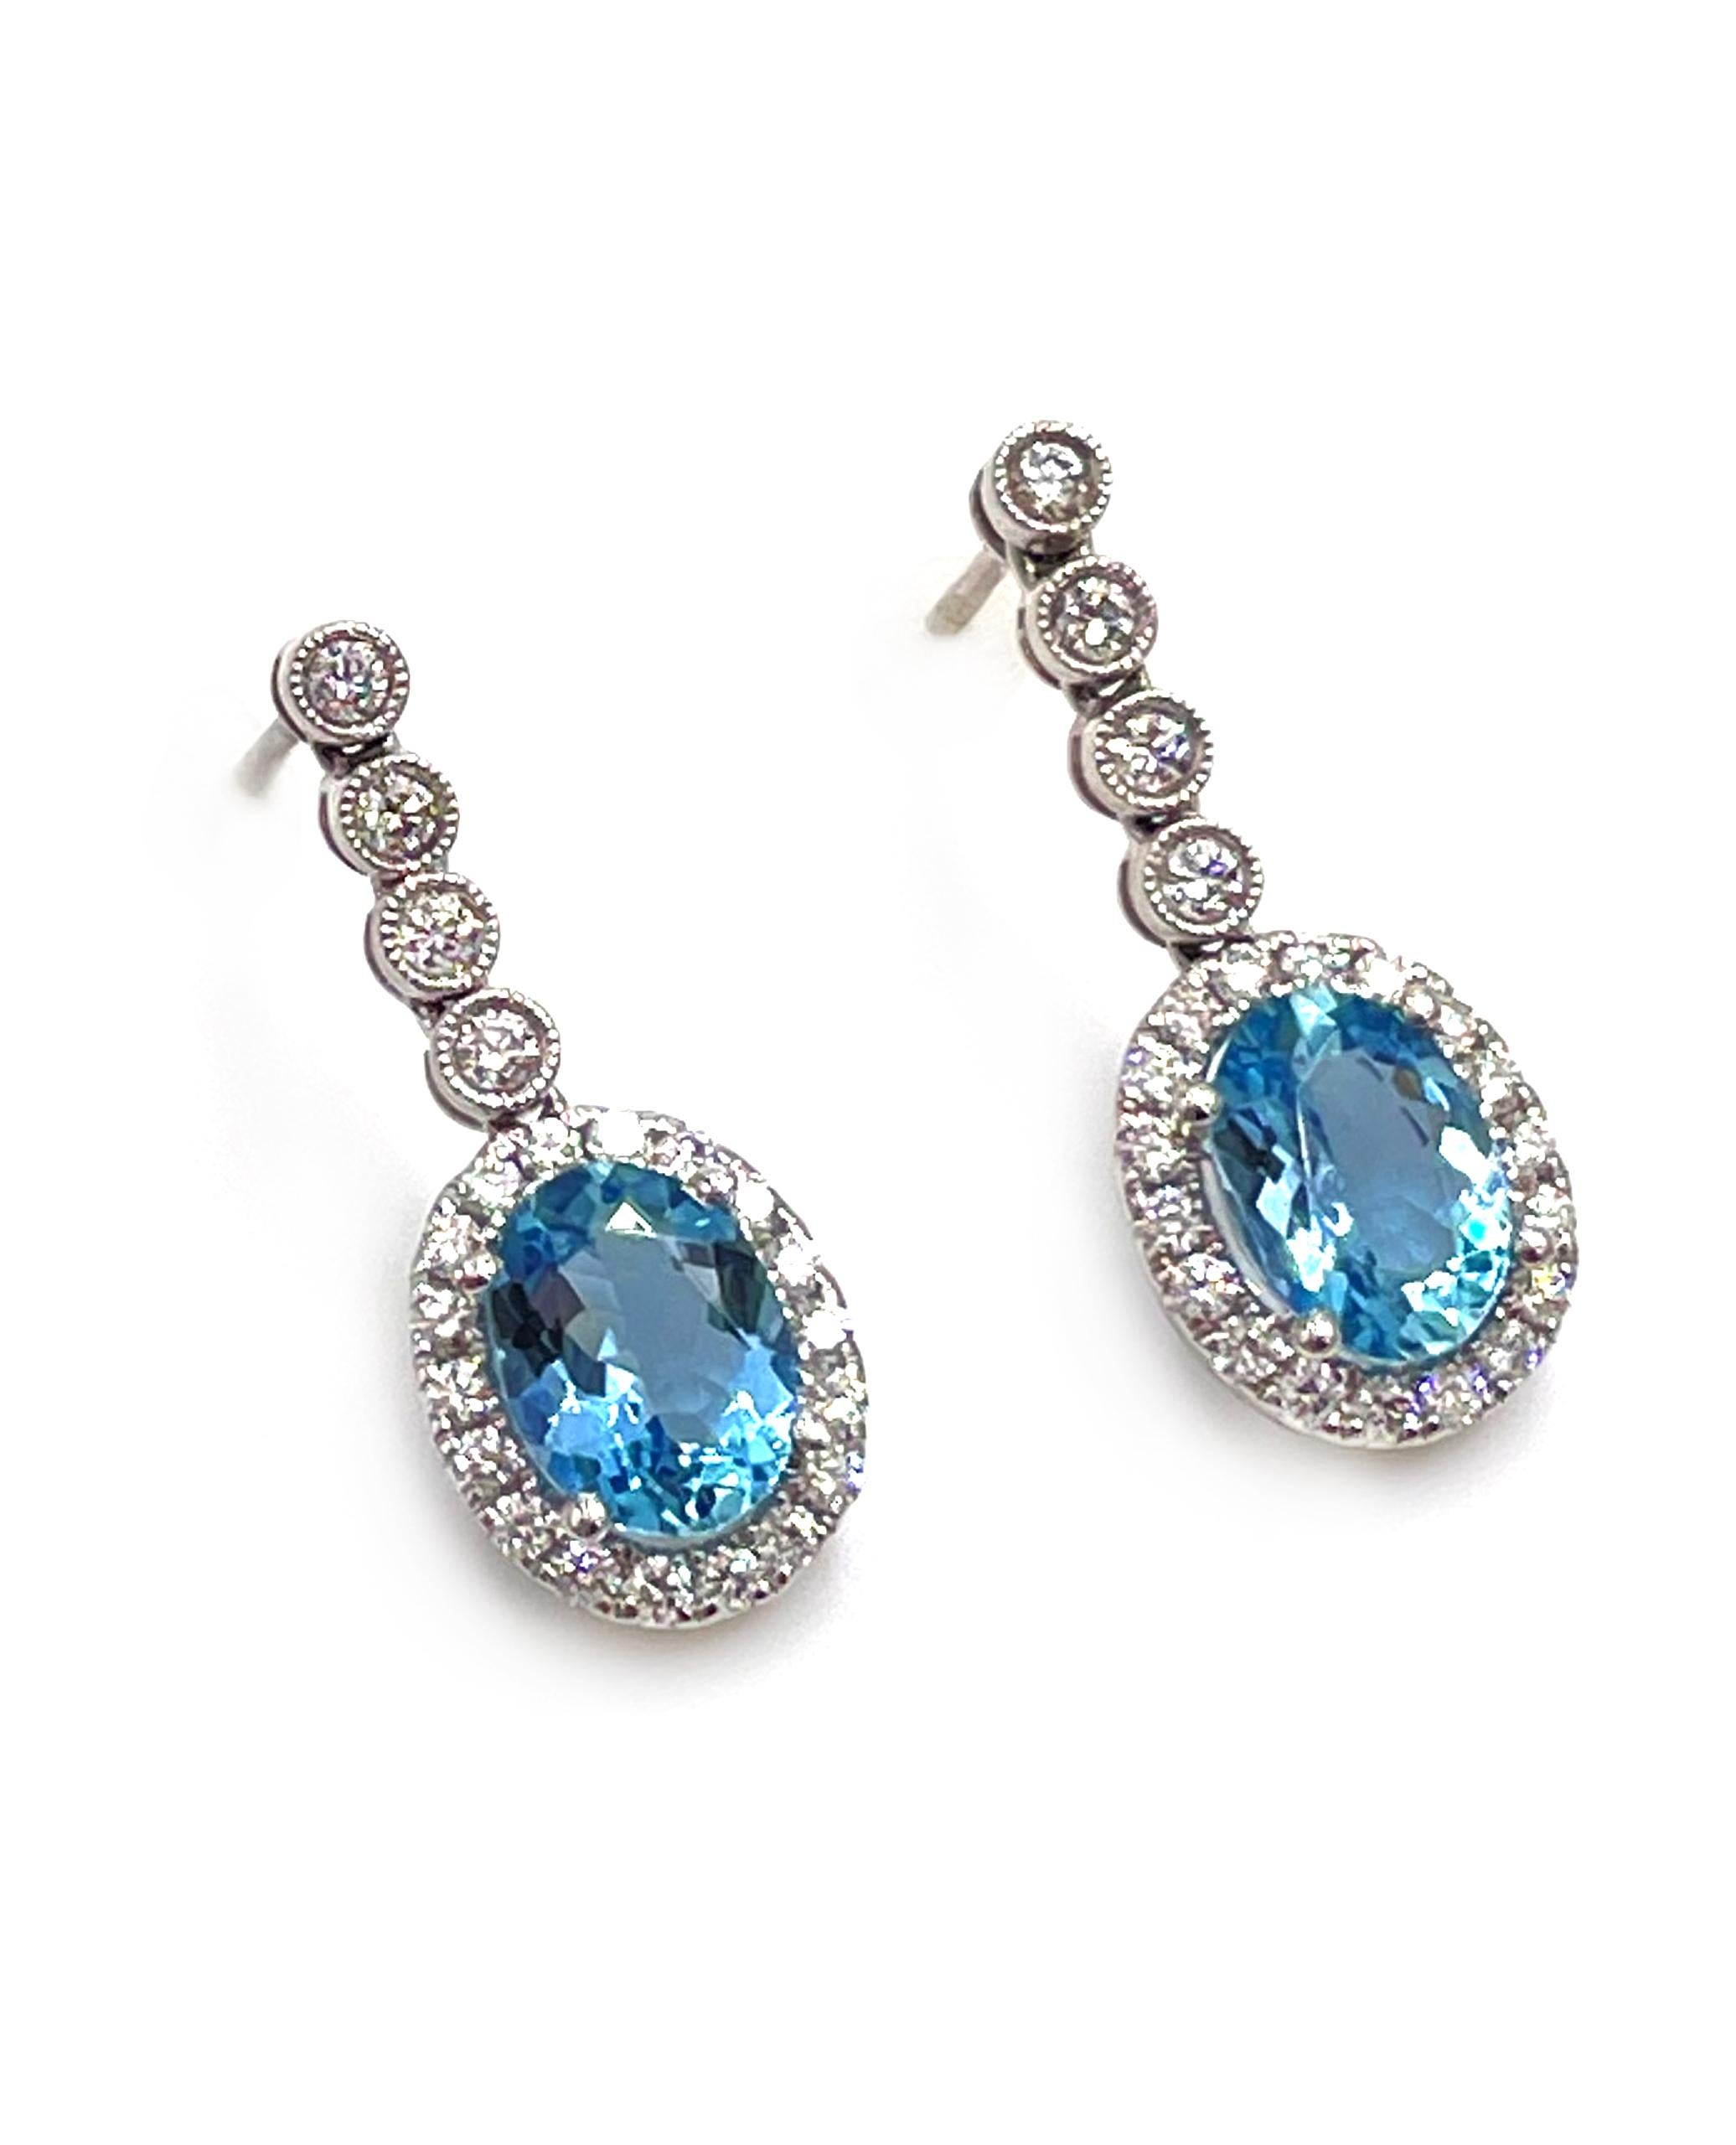 Pair of 18K white gold drop halo earrings with two oval shape aquamarines 1.88 carats total weight and 0.55 carats round diamonds.

- Diamonds are on average G/H color, SI1 clarity.
- Friction backs with medium size backings